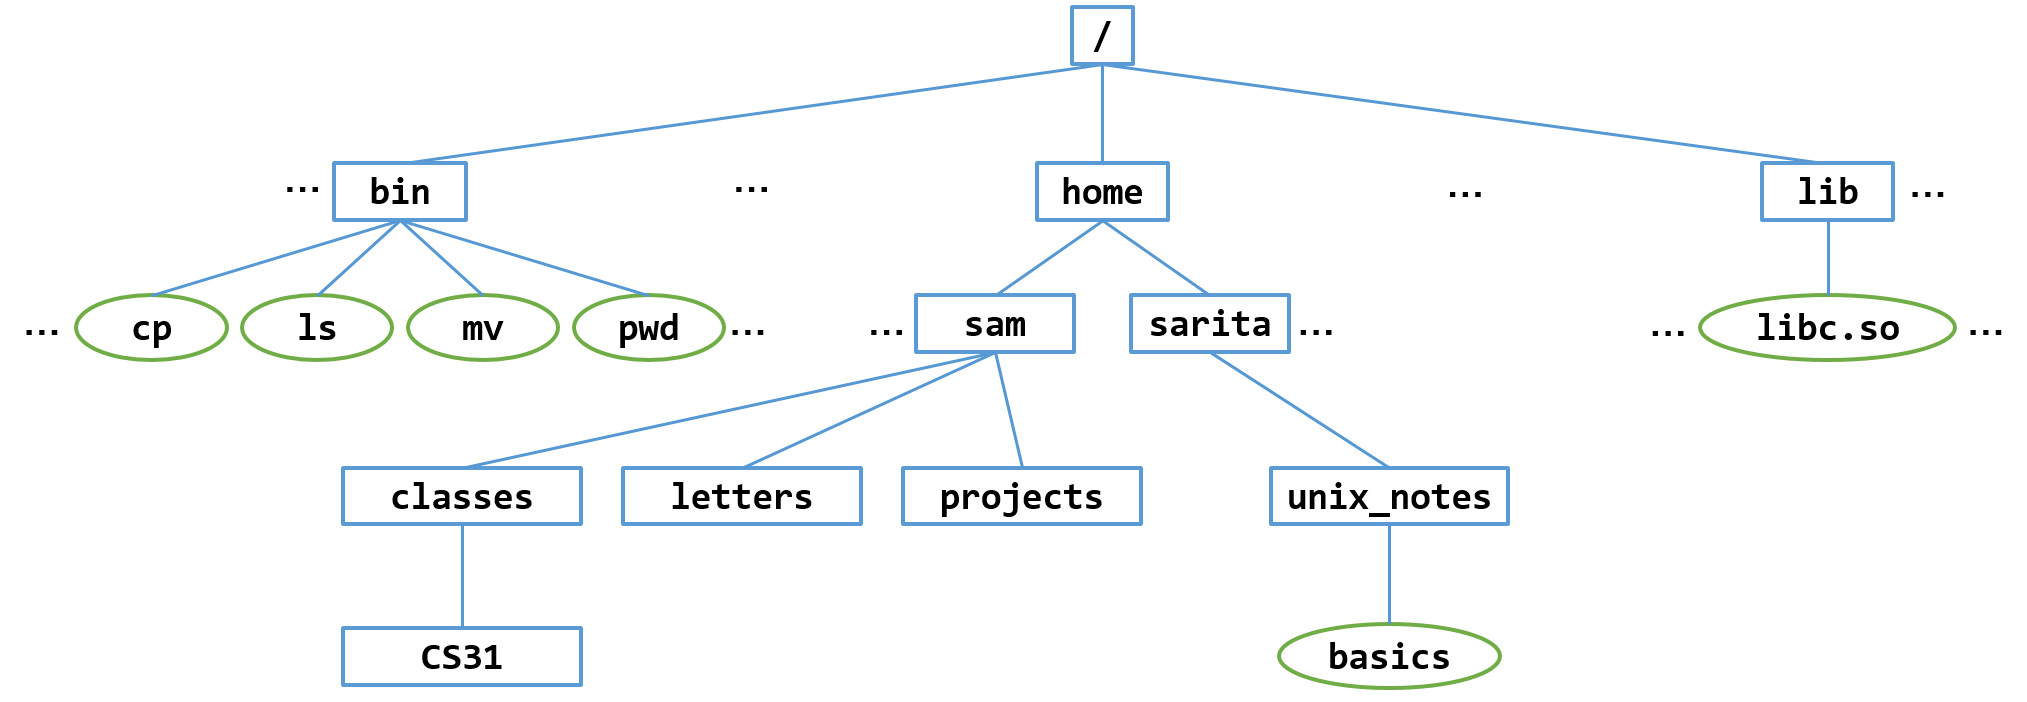 The unix file system after sam creates subdirectories classes, letters, projects, and creates a subdirectory under classes named CS31.